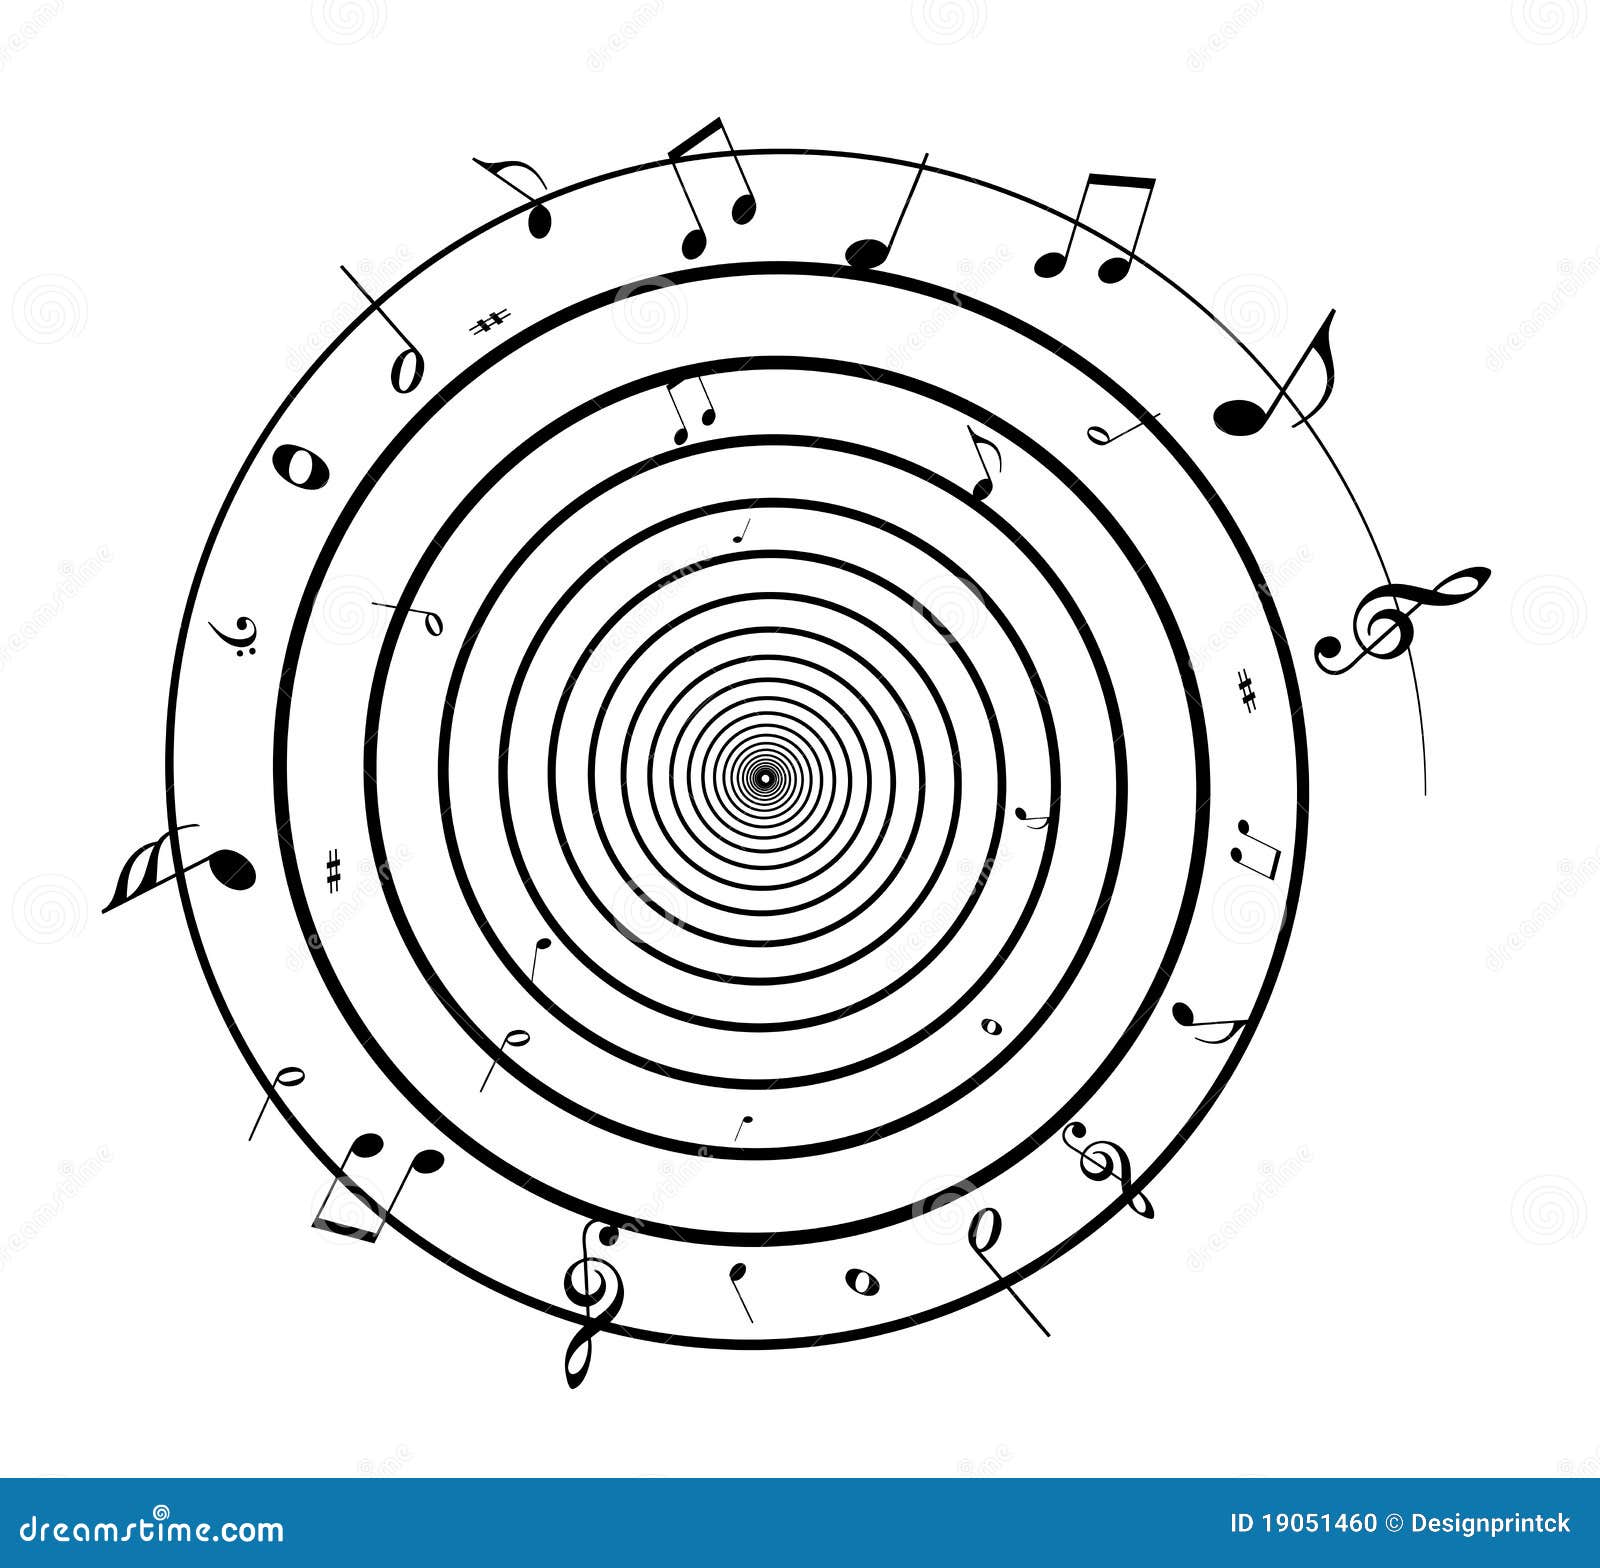 Spiral music notes s